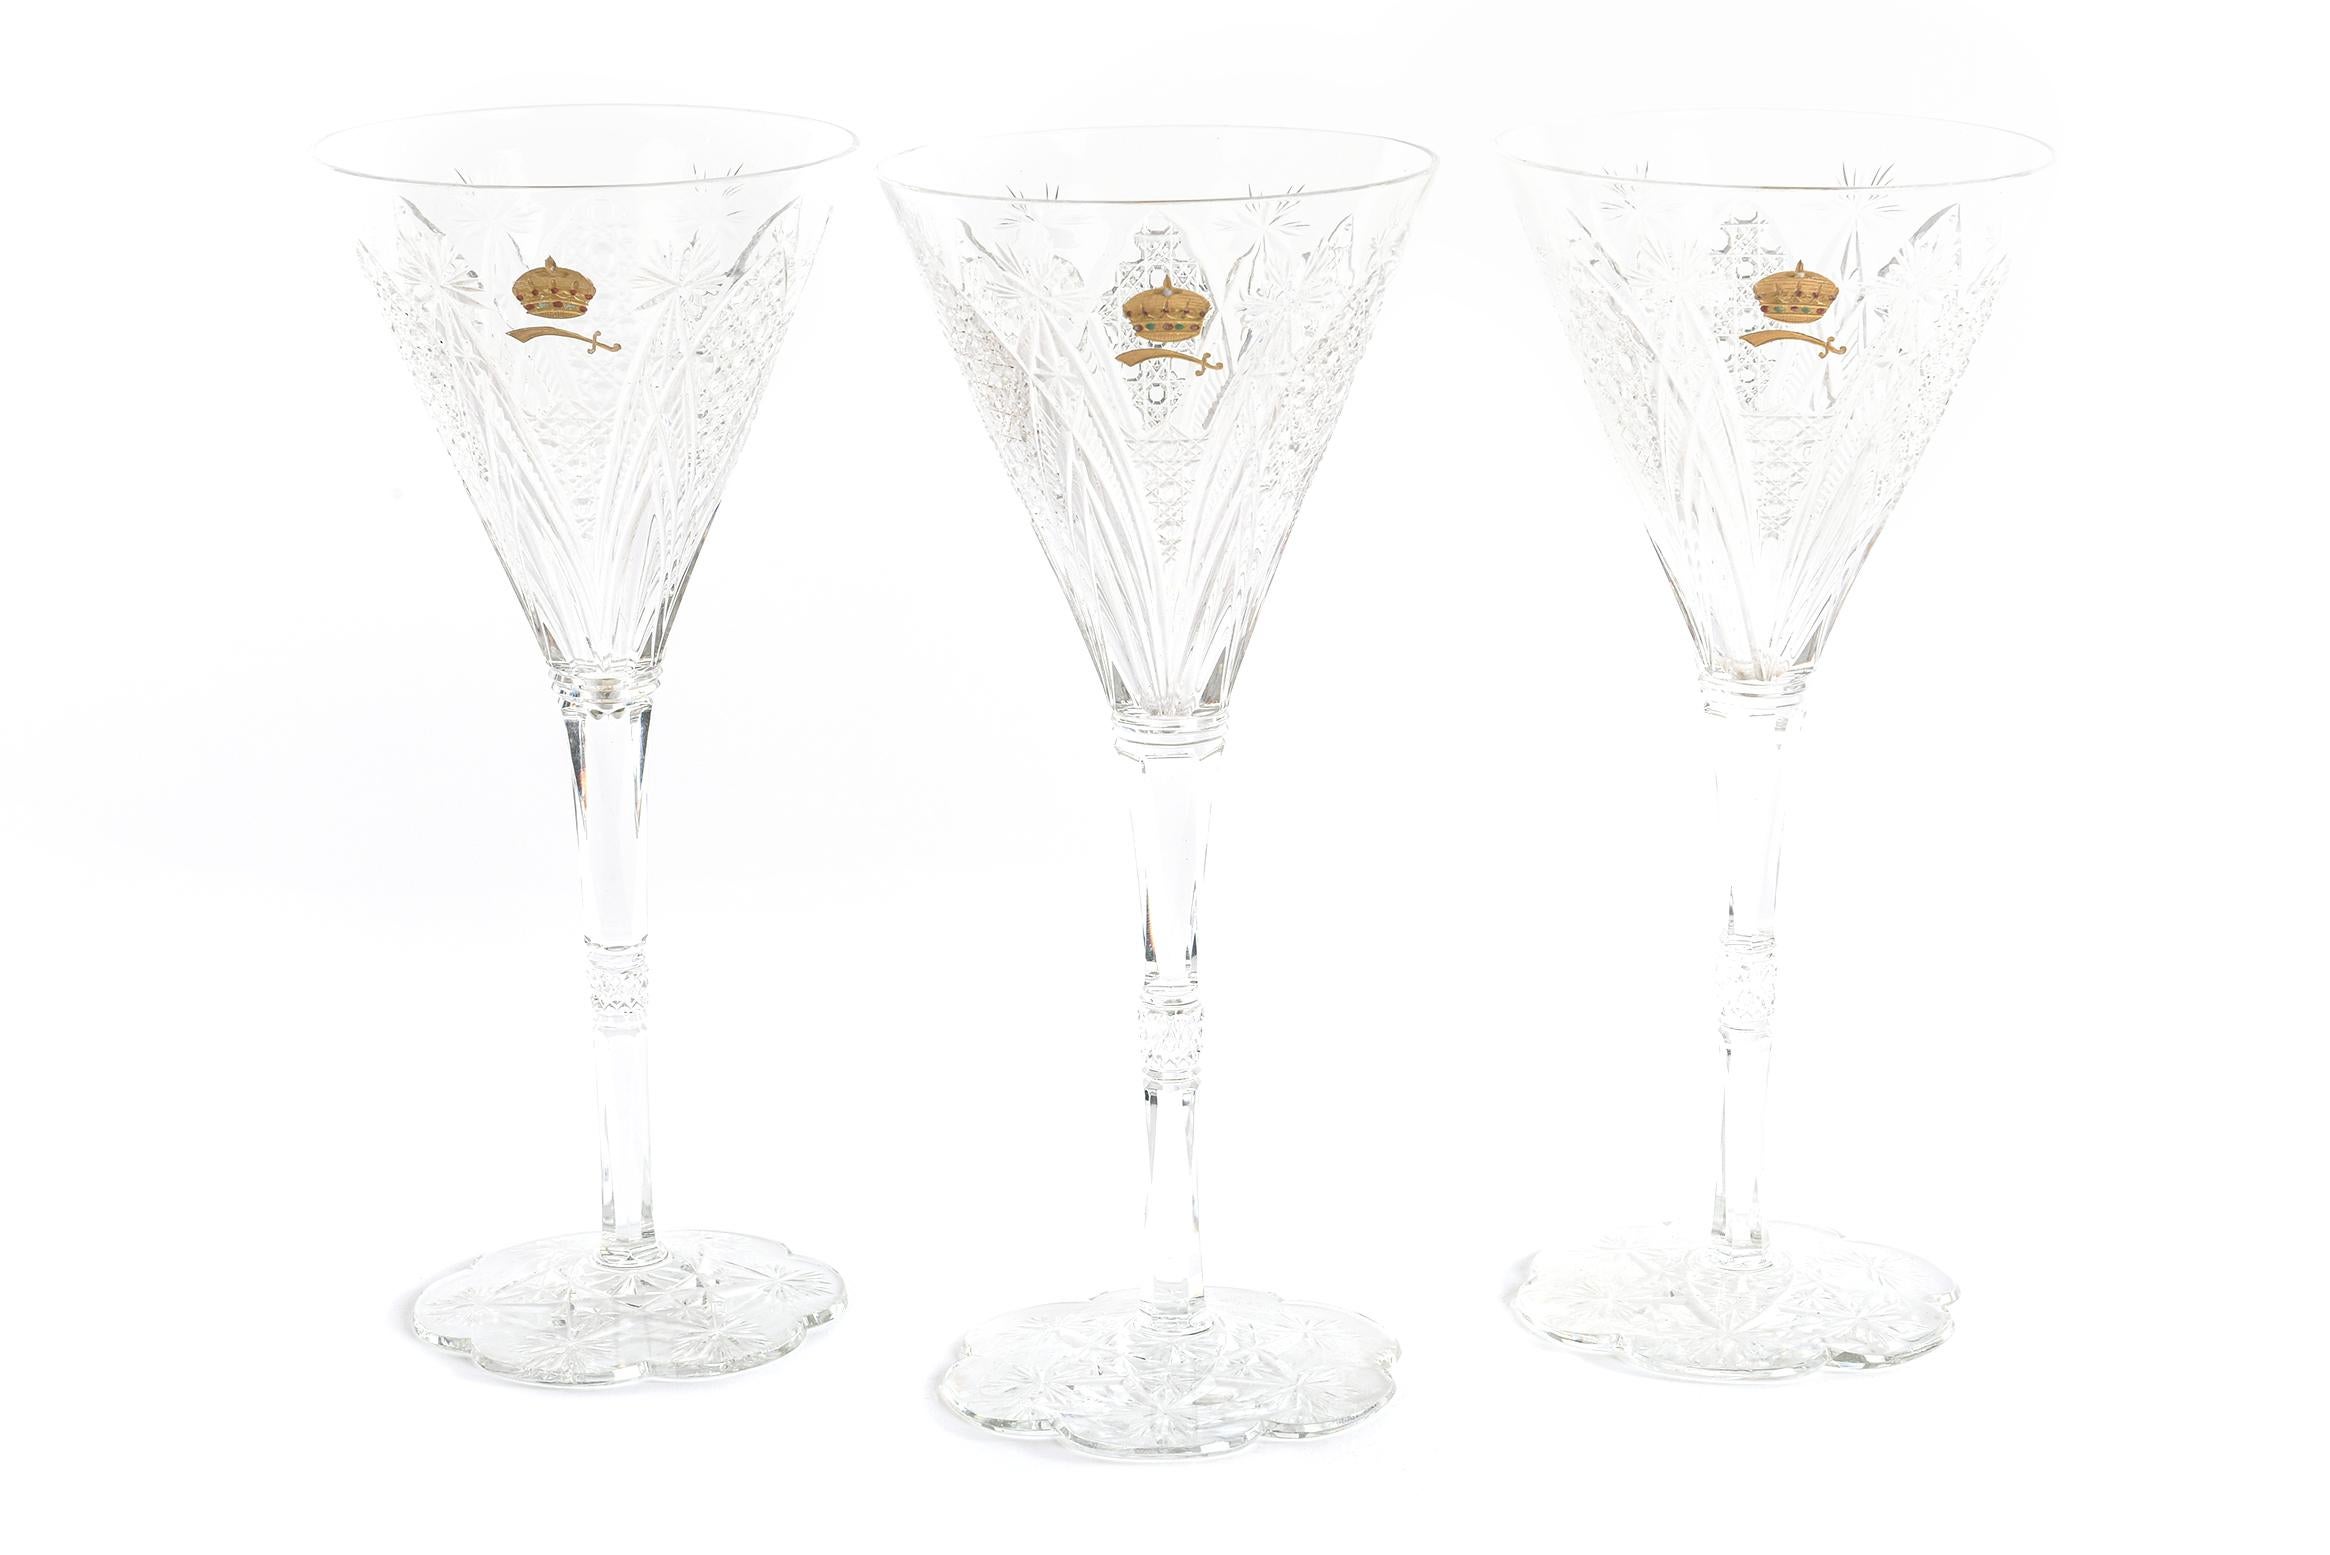 A wonderful opportunity to add to your Museum Quality collection with this set of three wine glasses.
Please see our other listings for this rare pattern that has been gracing Royal tables since the early 1900s. From France's premier Cristallerie ,